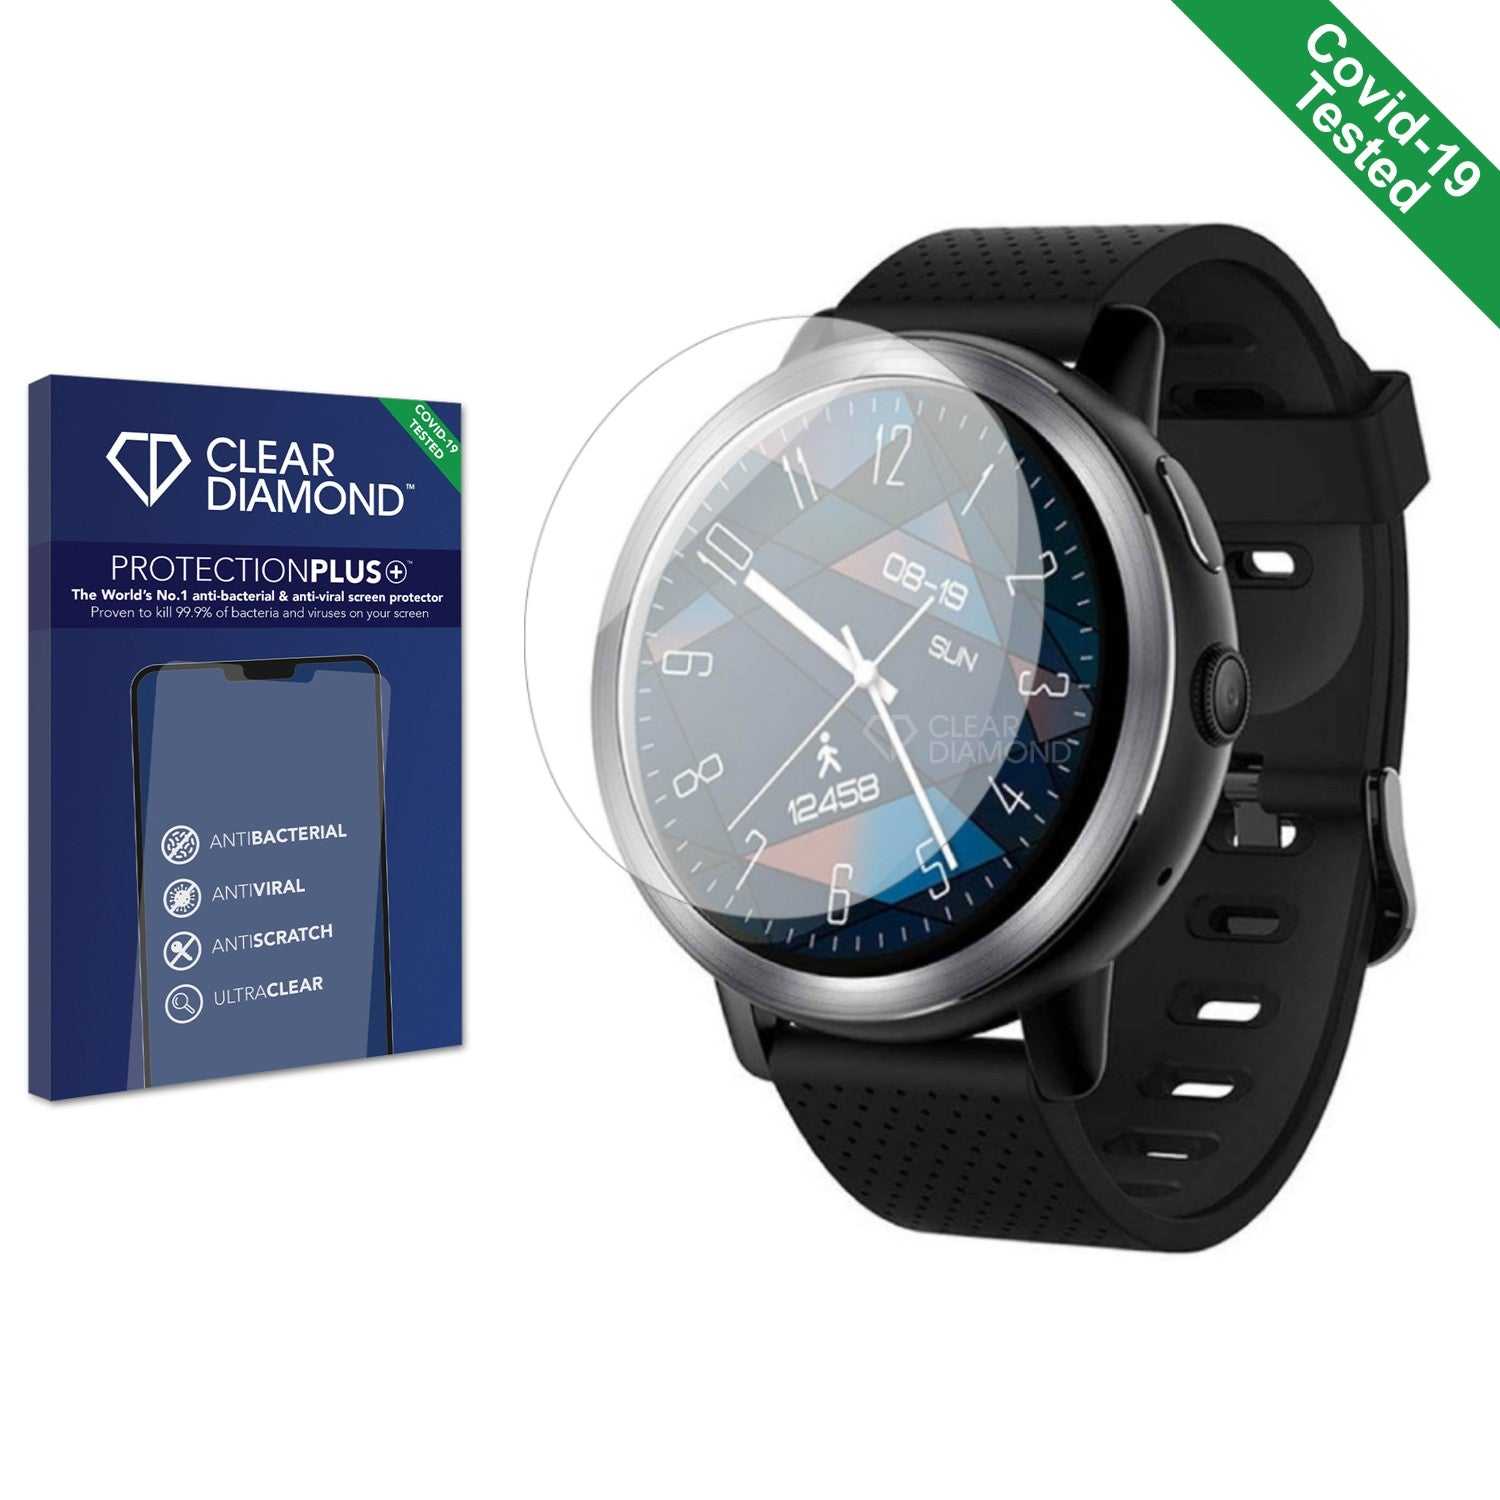 ScreenShield, Clear Diamond Anti-viral Screen Protector for Lemfo Smartwatch 1.39in